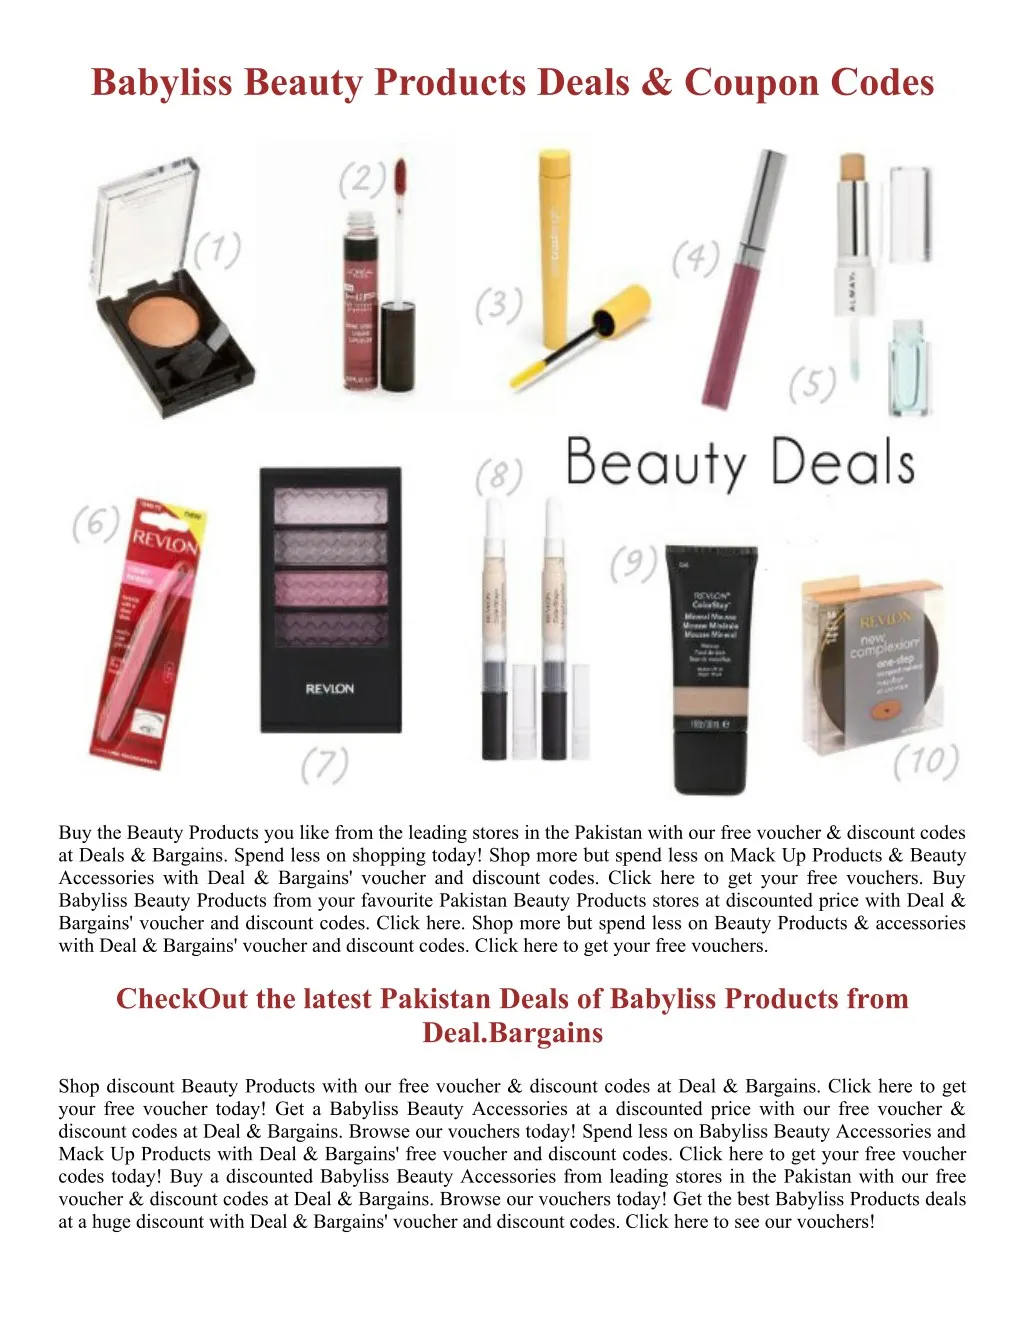 babyliss beauty products deals coupon codes